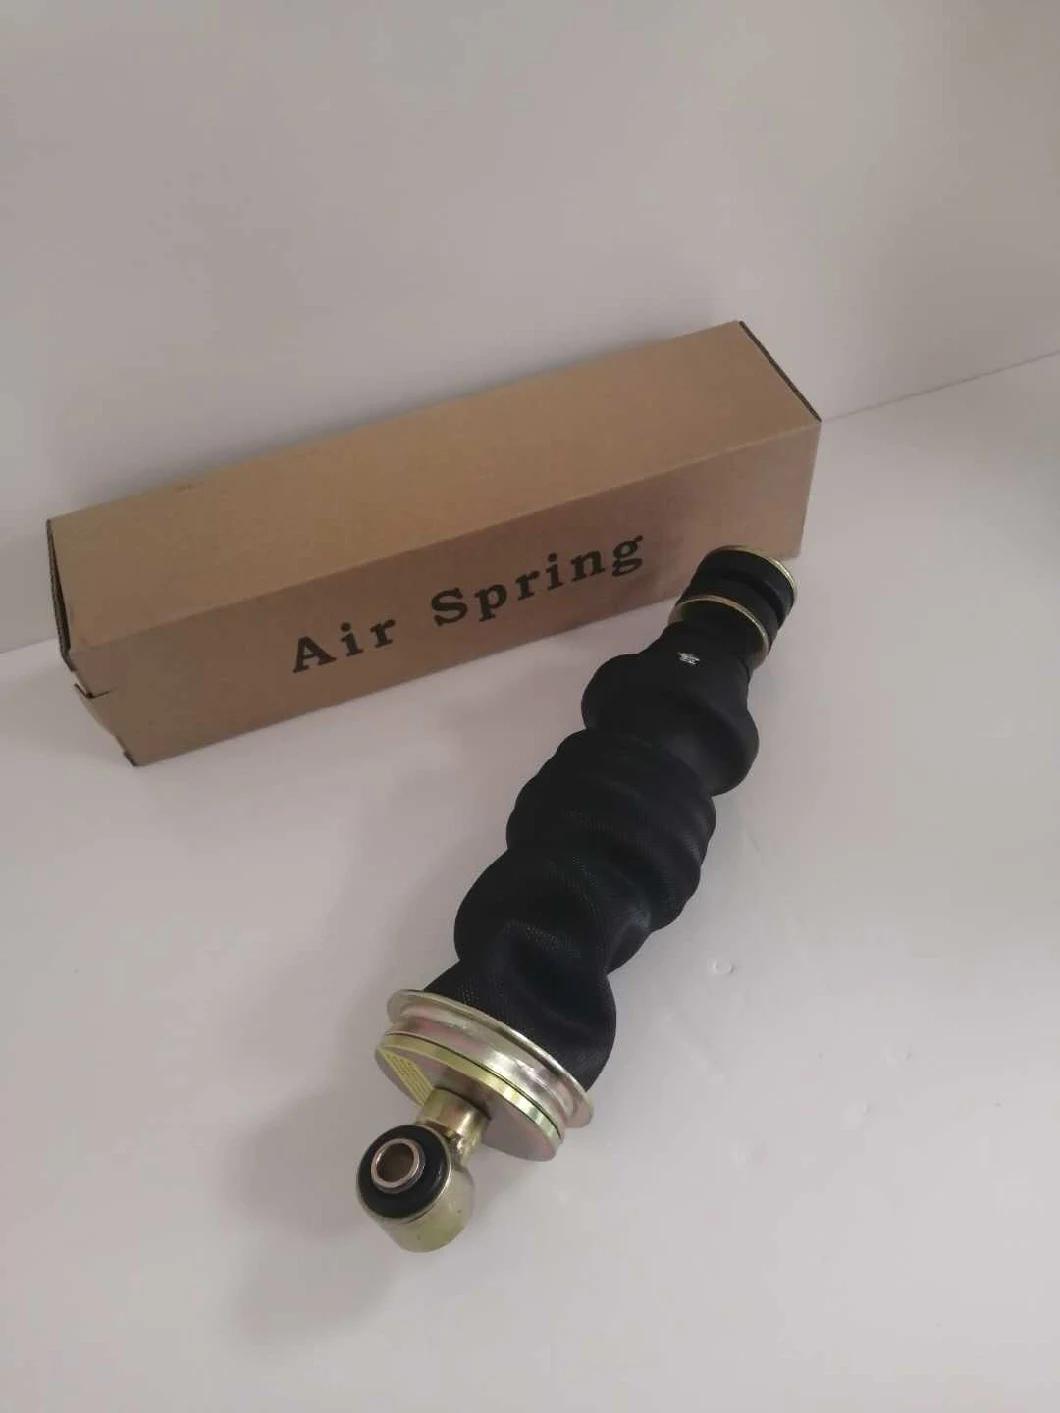 High Quality 81417226048 81417226051 Shock Absorber Fit for Man F2000 Truck Parts